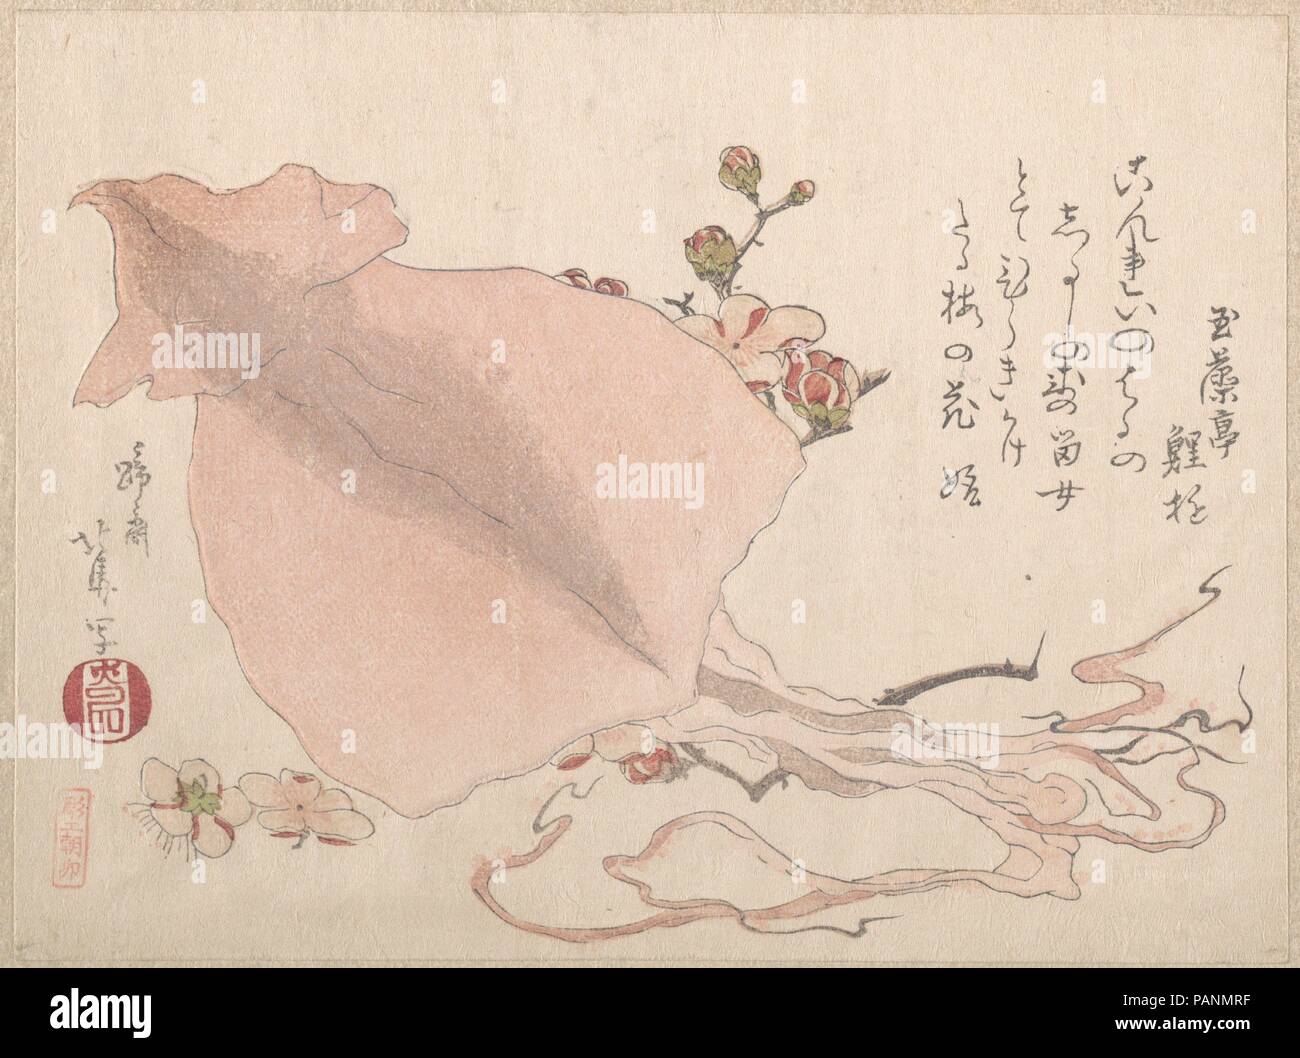 Dried Cuttle-Fish and Plum Blossoms. Artist: Teisai Hokuba (Japanese, 1771-1844). Calligrapher: Chou. Culture: Japan. Dimensions: 5 9/16 x 7 1/2 in. (14.1 x 19.1 cm). Date: early 19th century. Museum: Metropolitan Museum of Art, New York, USA. Stock Photo